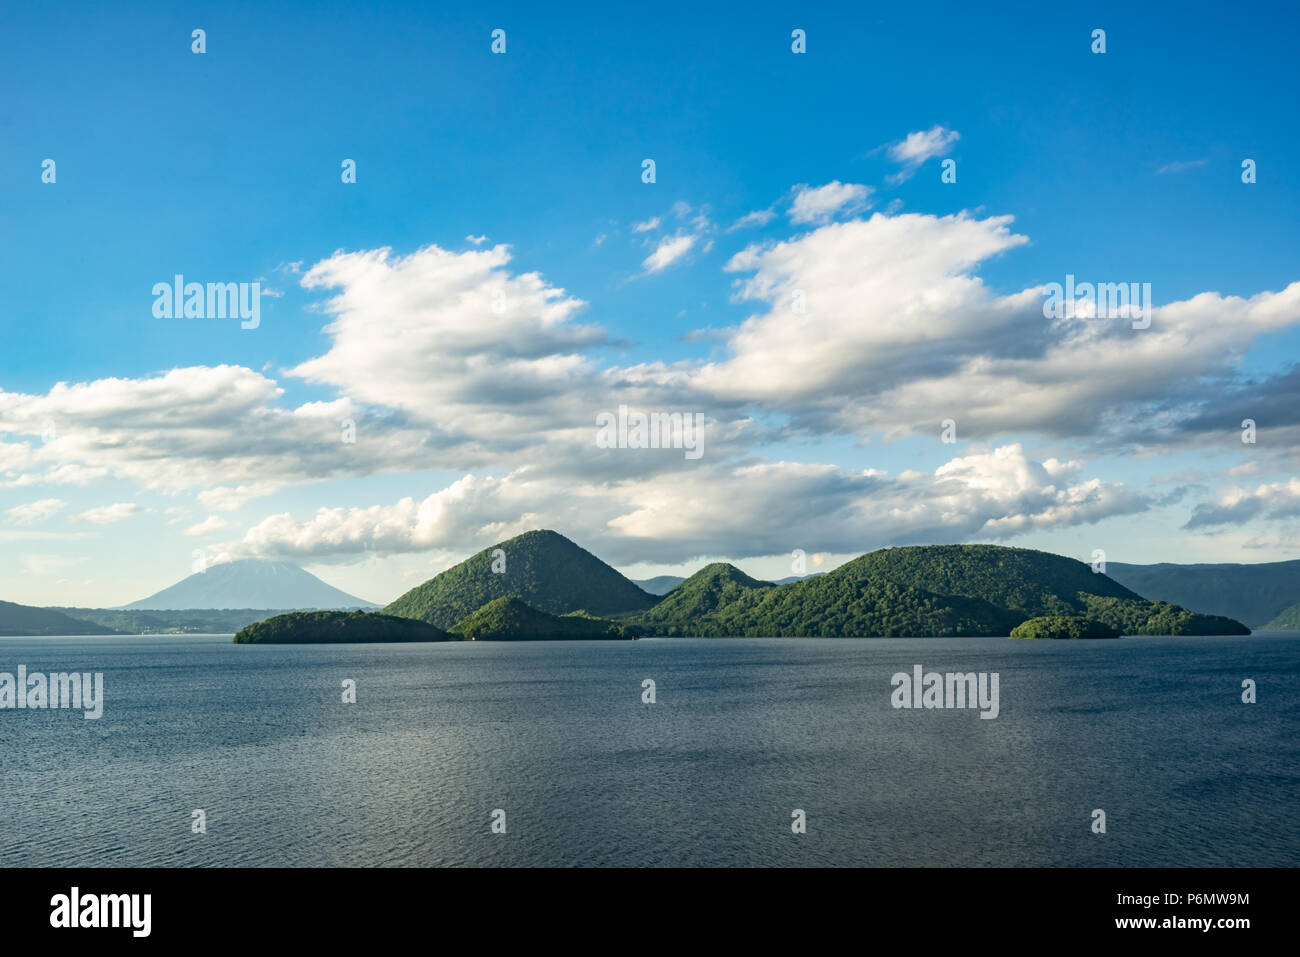 Nakajima island and Mount Yotei were seen from the shore of Lake Toya after a rainy cloudy day in June, 2018. Stock Photo